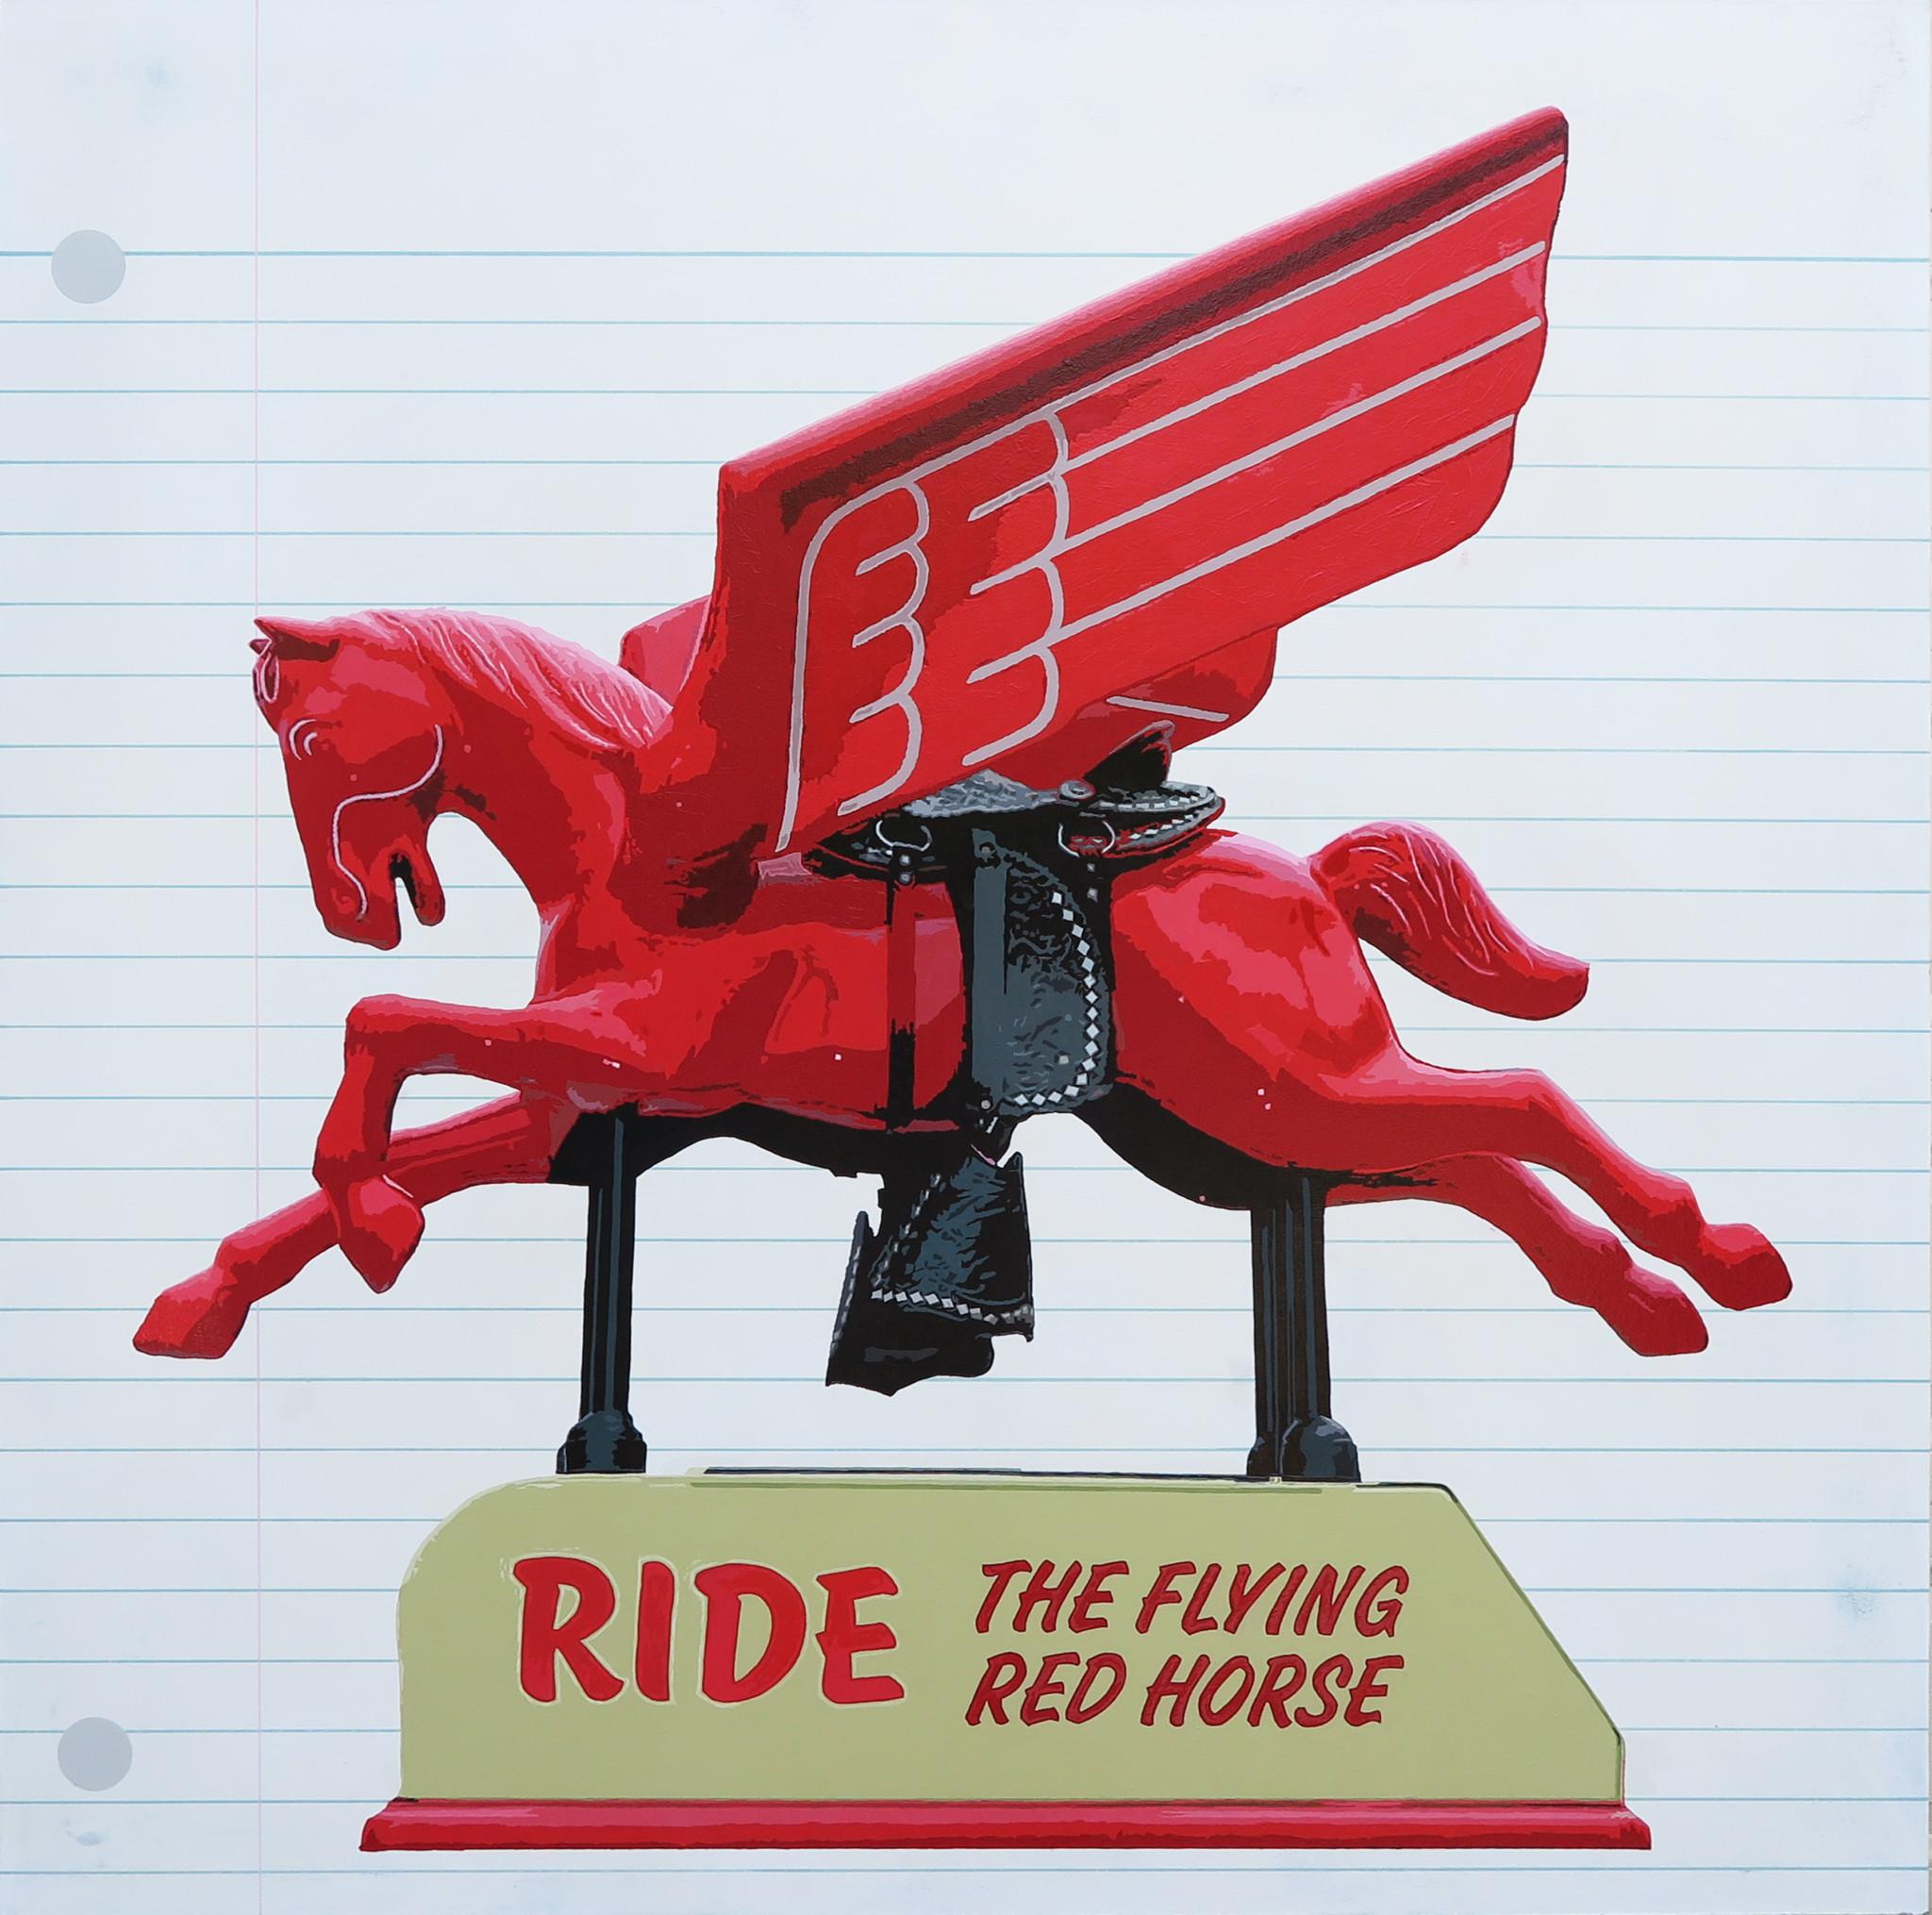 Flying Red Horse Logo - ANNIE HOOKER Flying Red Horse (sold) – Terzian Galleries | Park City ...